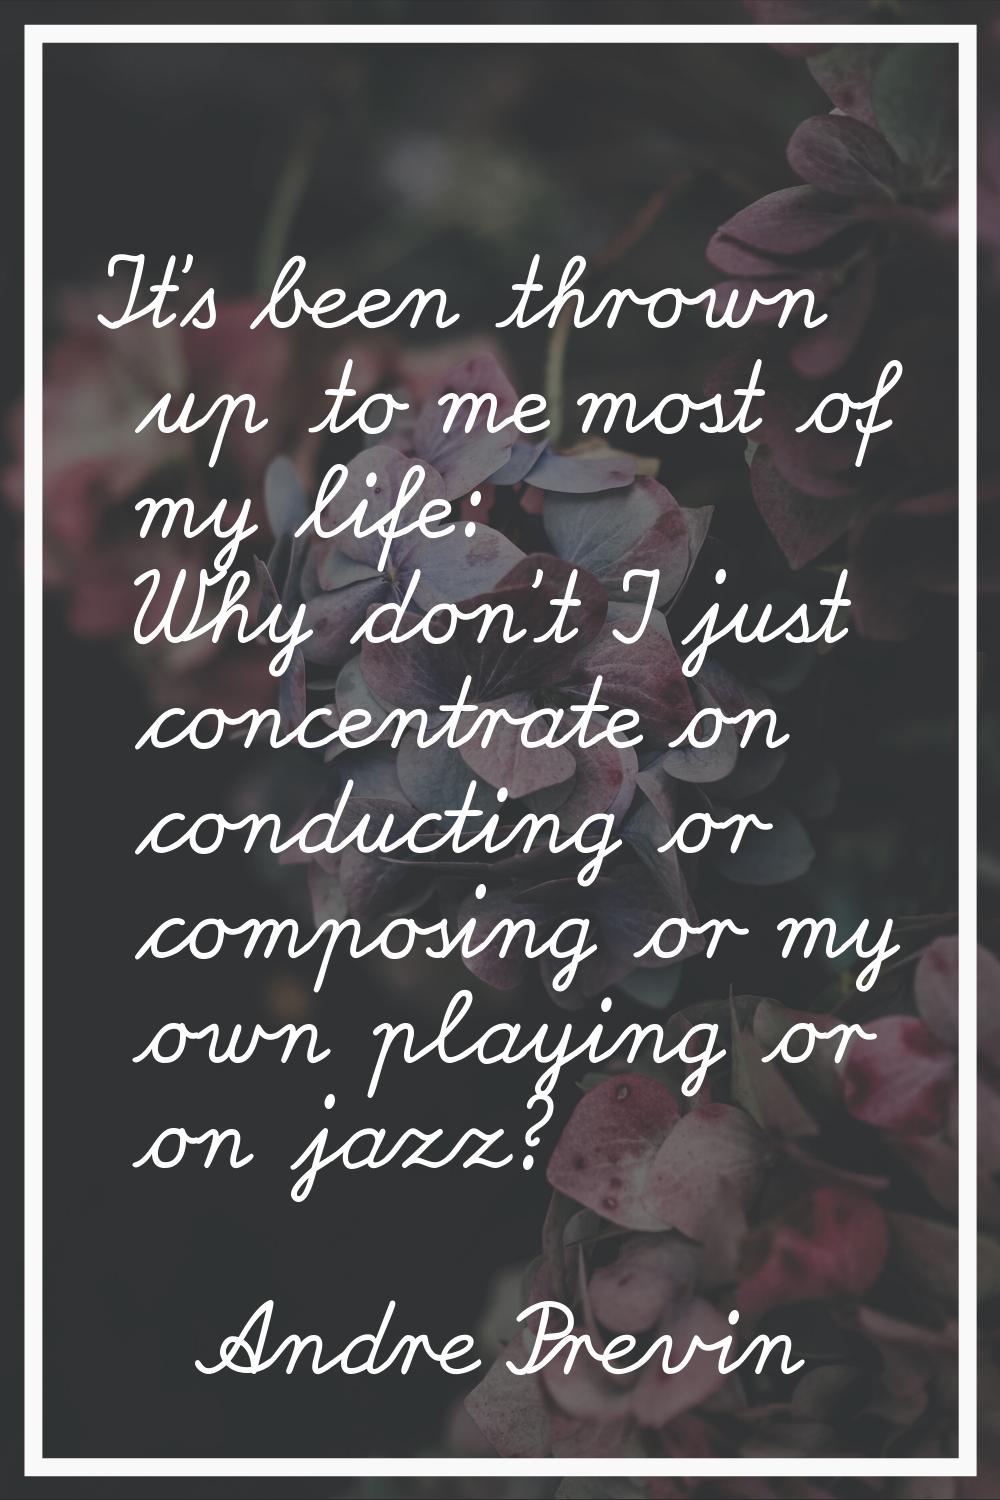 It's been thrown up to me most of my life: Why don't I just concentrate on conducting or composing 